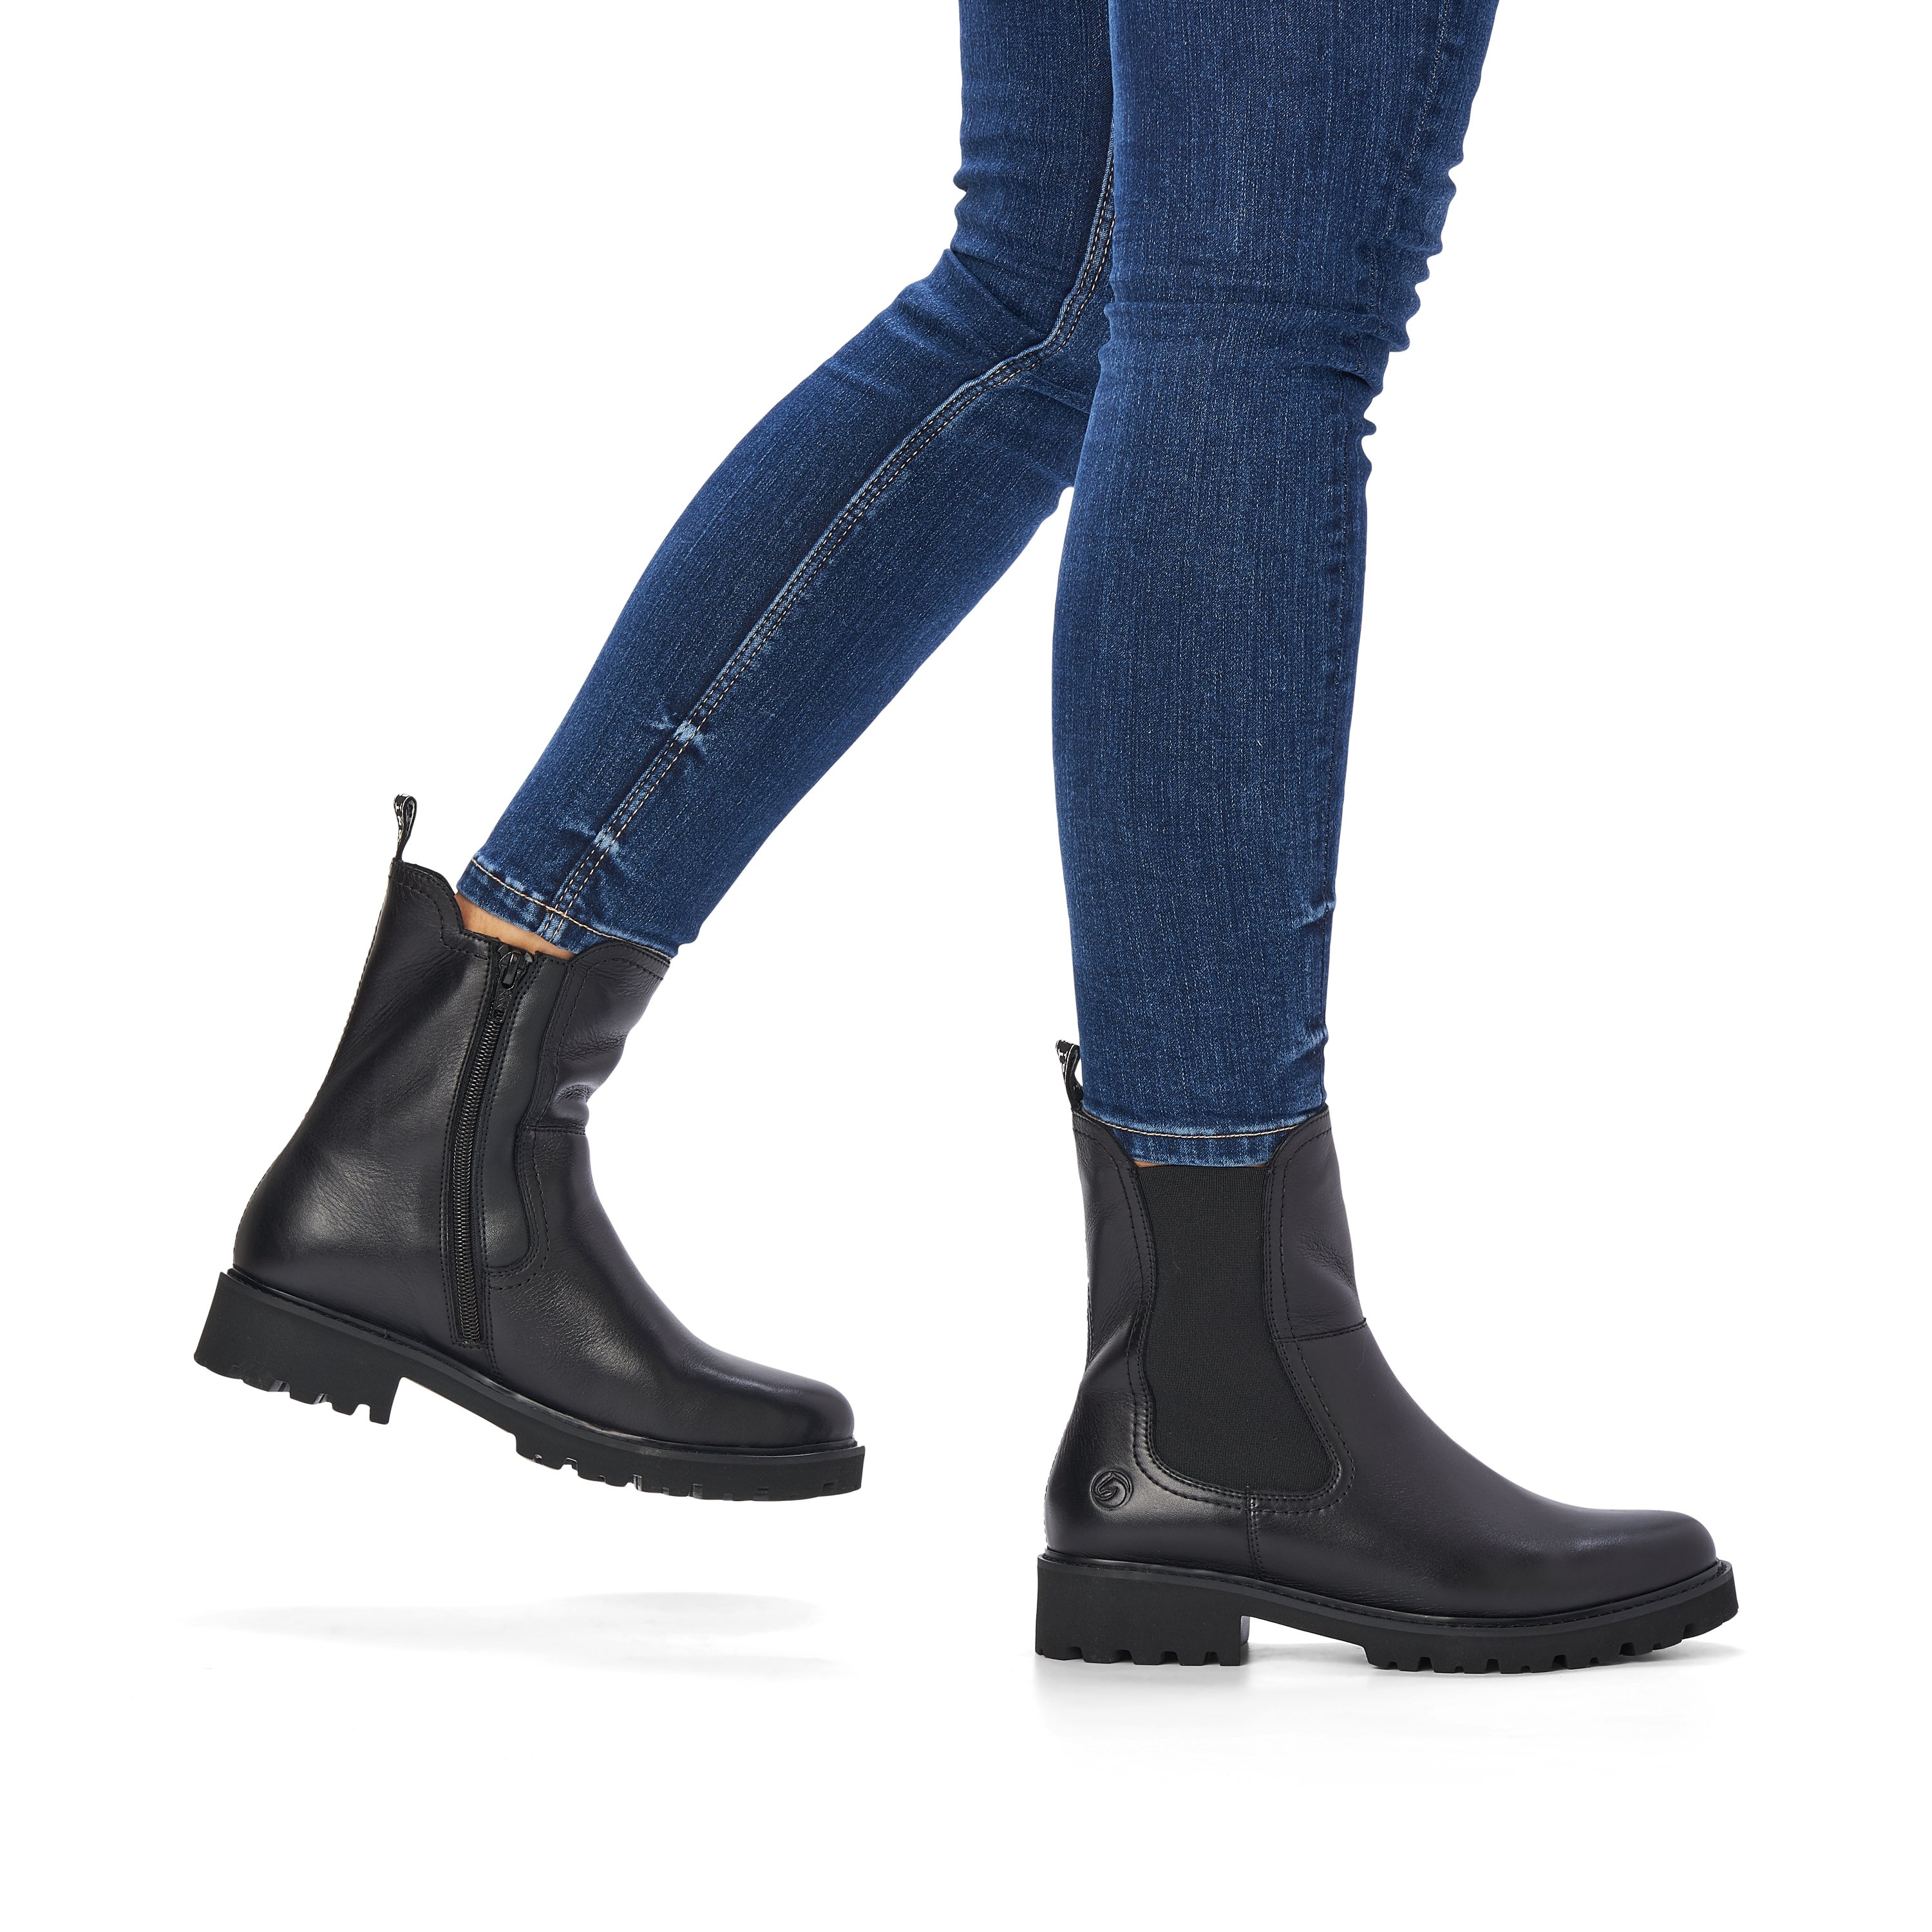 Graphite black remonte women´s Chelsea boots D8694-00 with cushioning sole. Shoe on foot